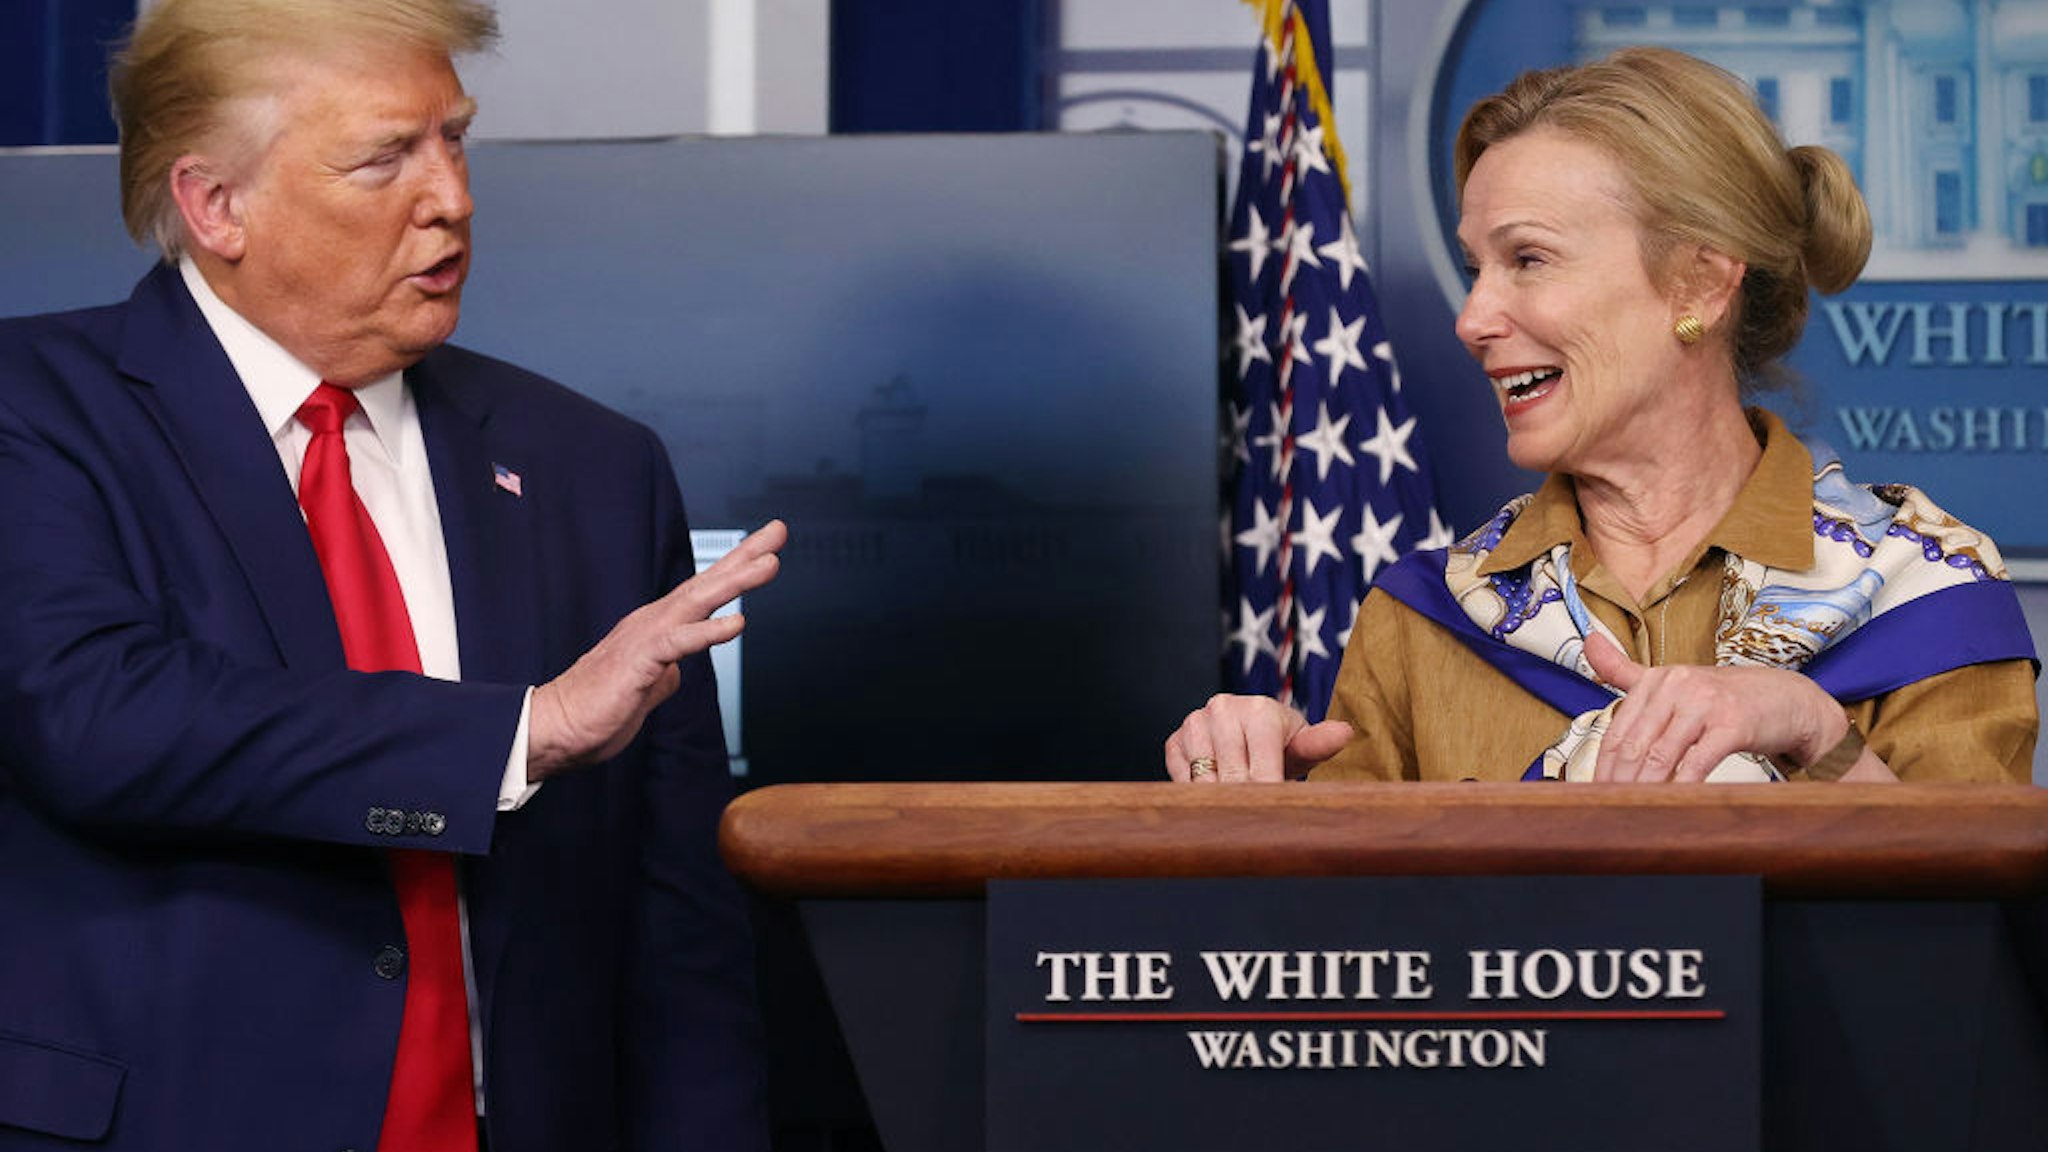 White House coronavirus response coordinator Deborah Birx speaks while flanked by U.S. President Donald Trump following a meeting of his coronavirus task force in the Brady Press Briefing Room at the White House on April 6, 2020 in Washington, DC.